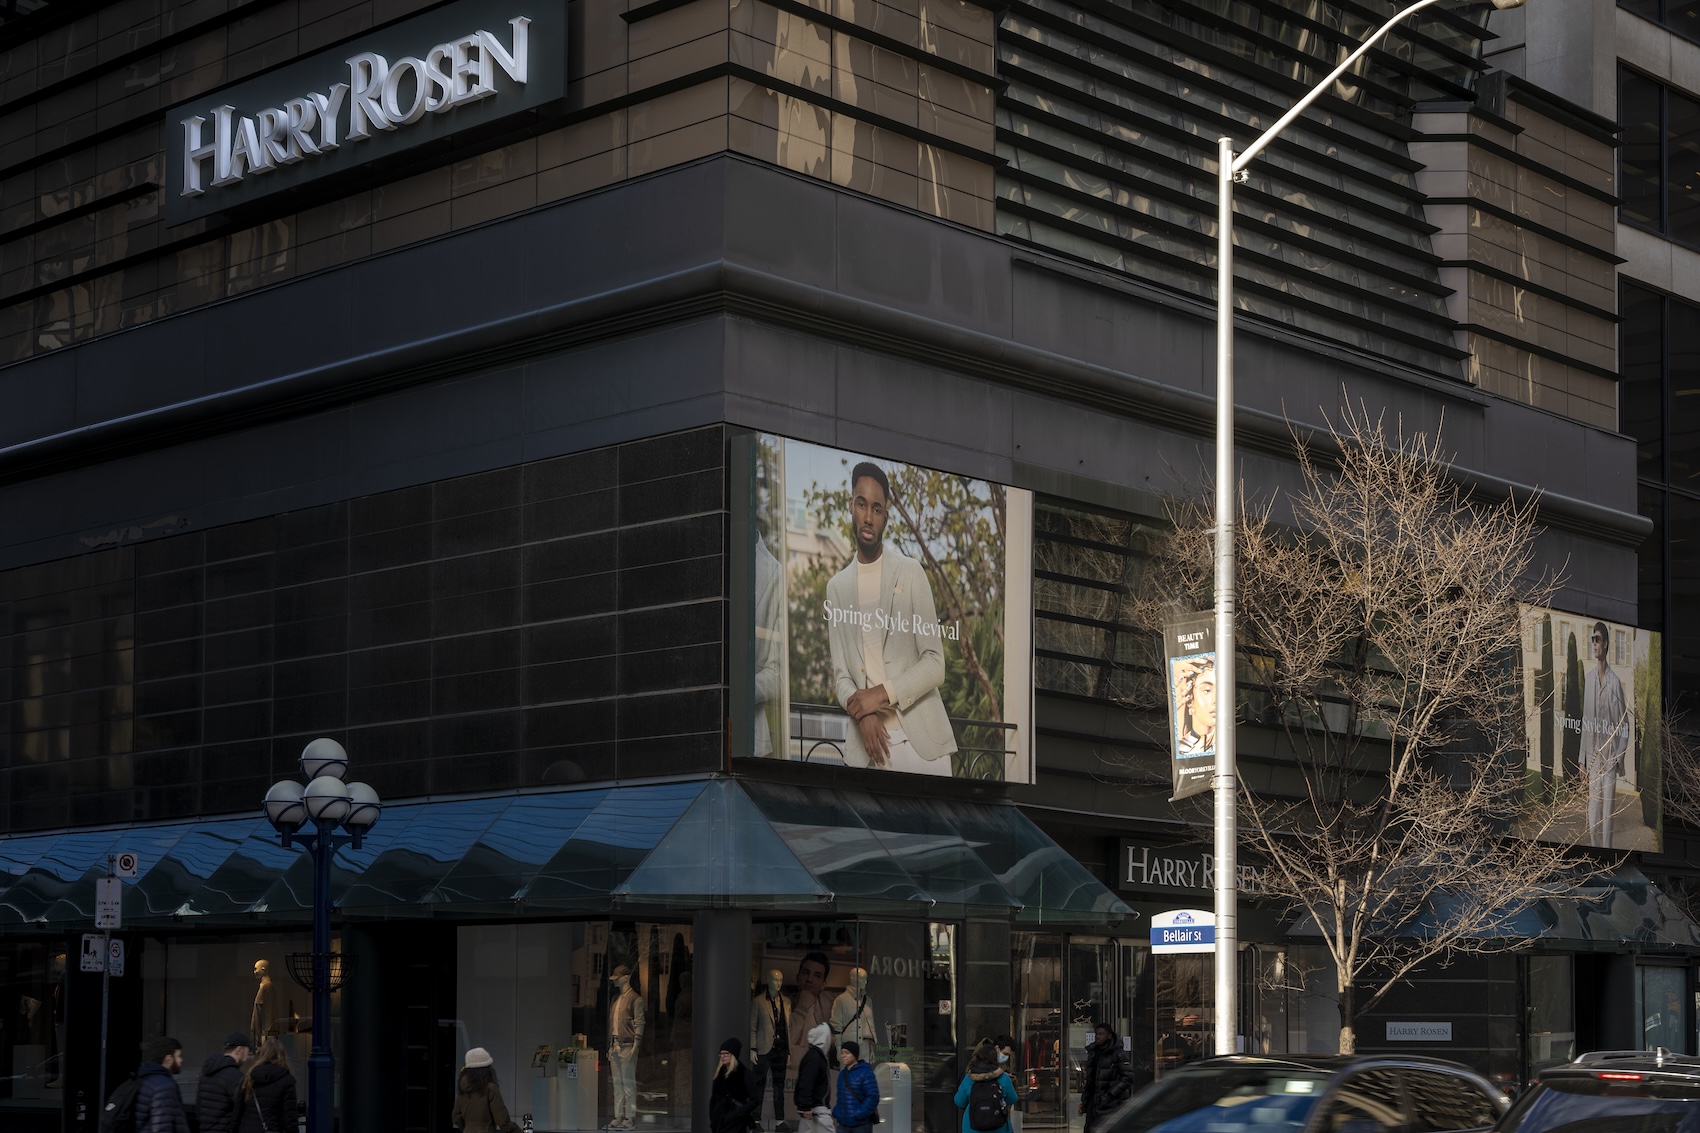 Harry Rosen at the corner of Bloor St W and Bellair the current flagship location. 